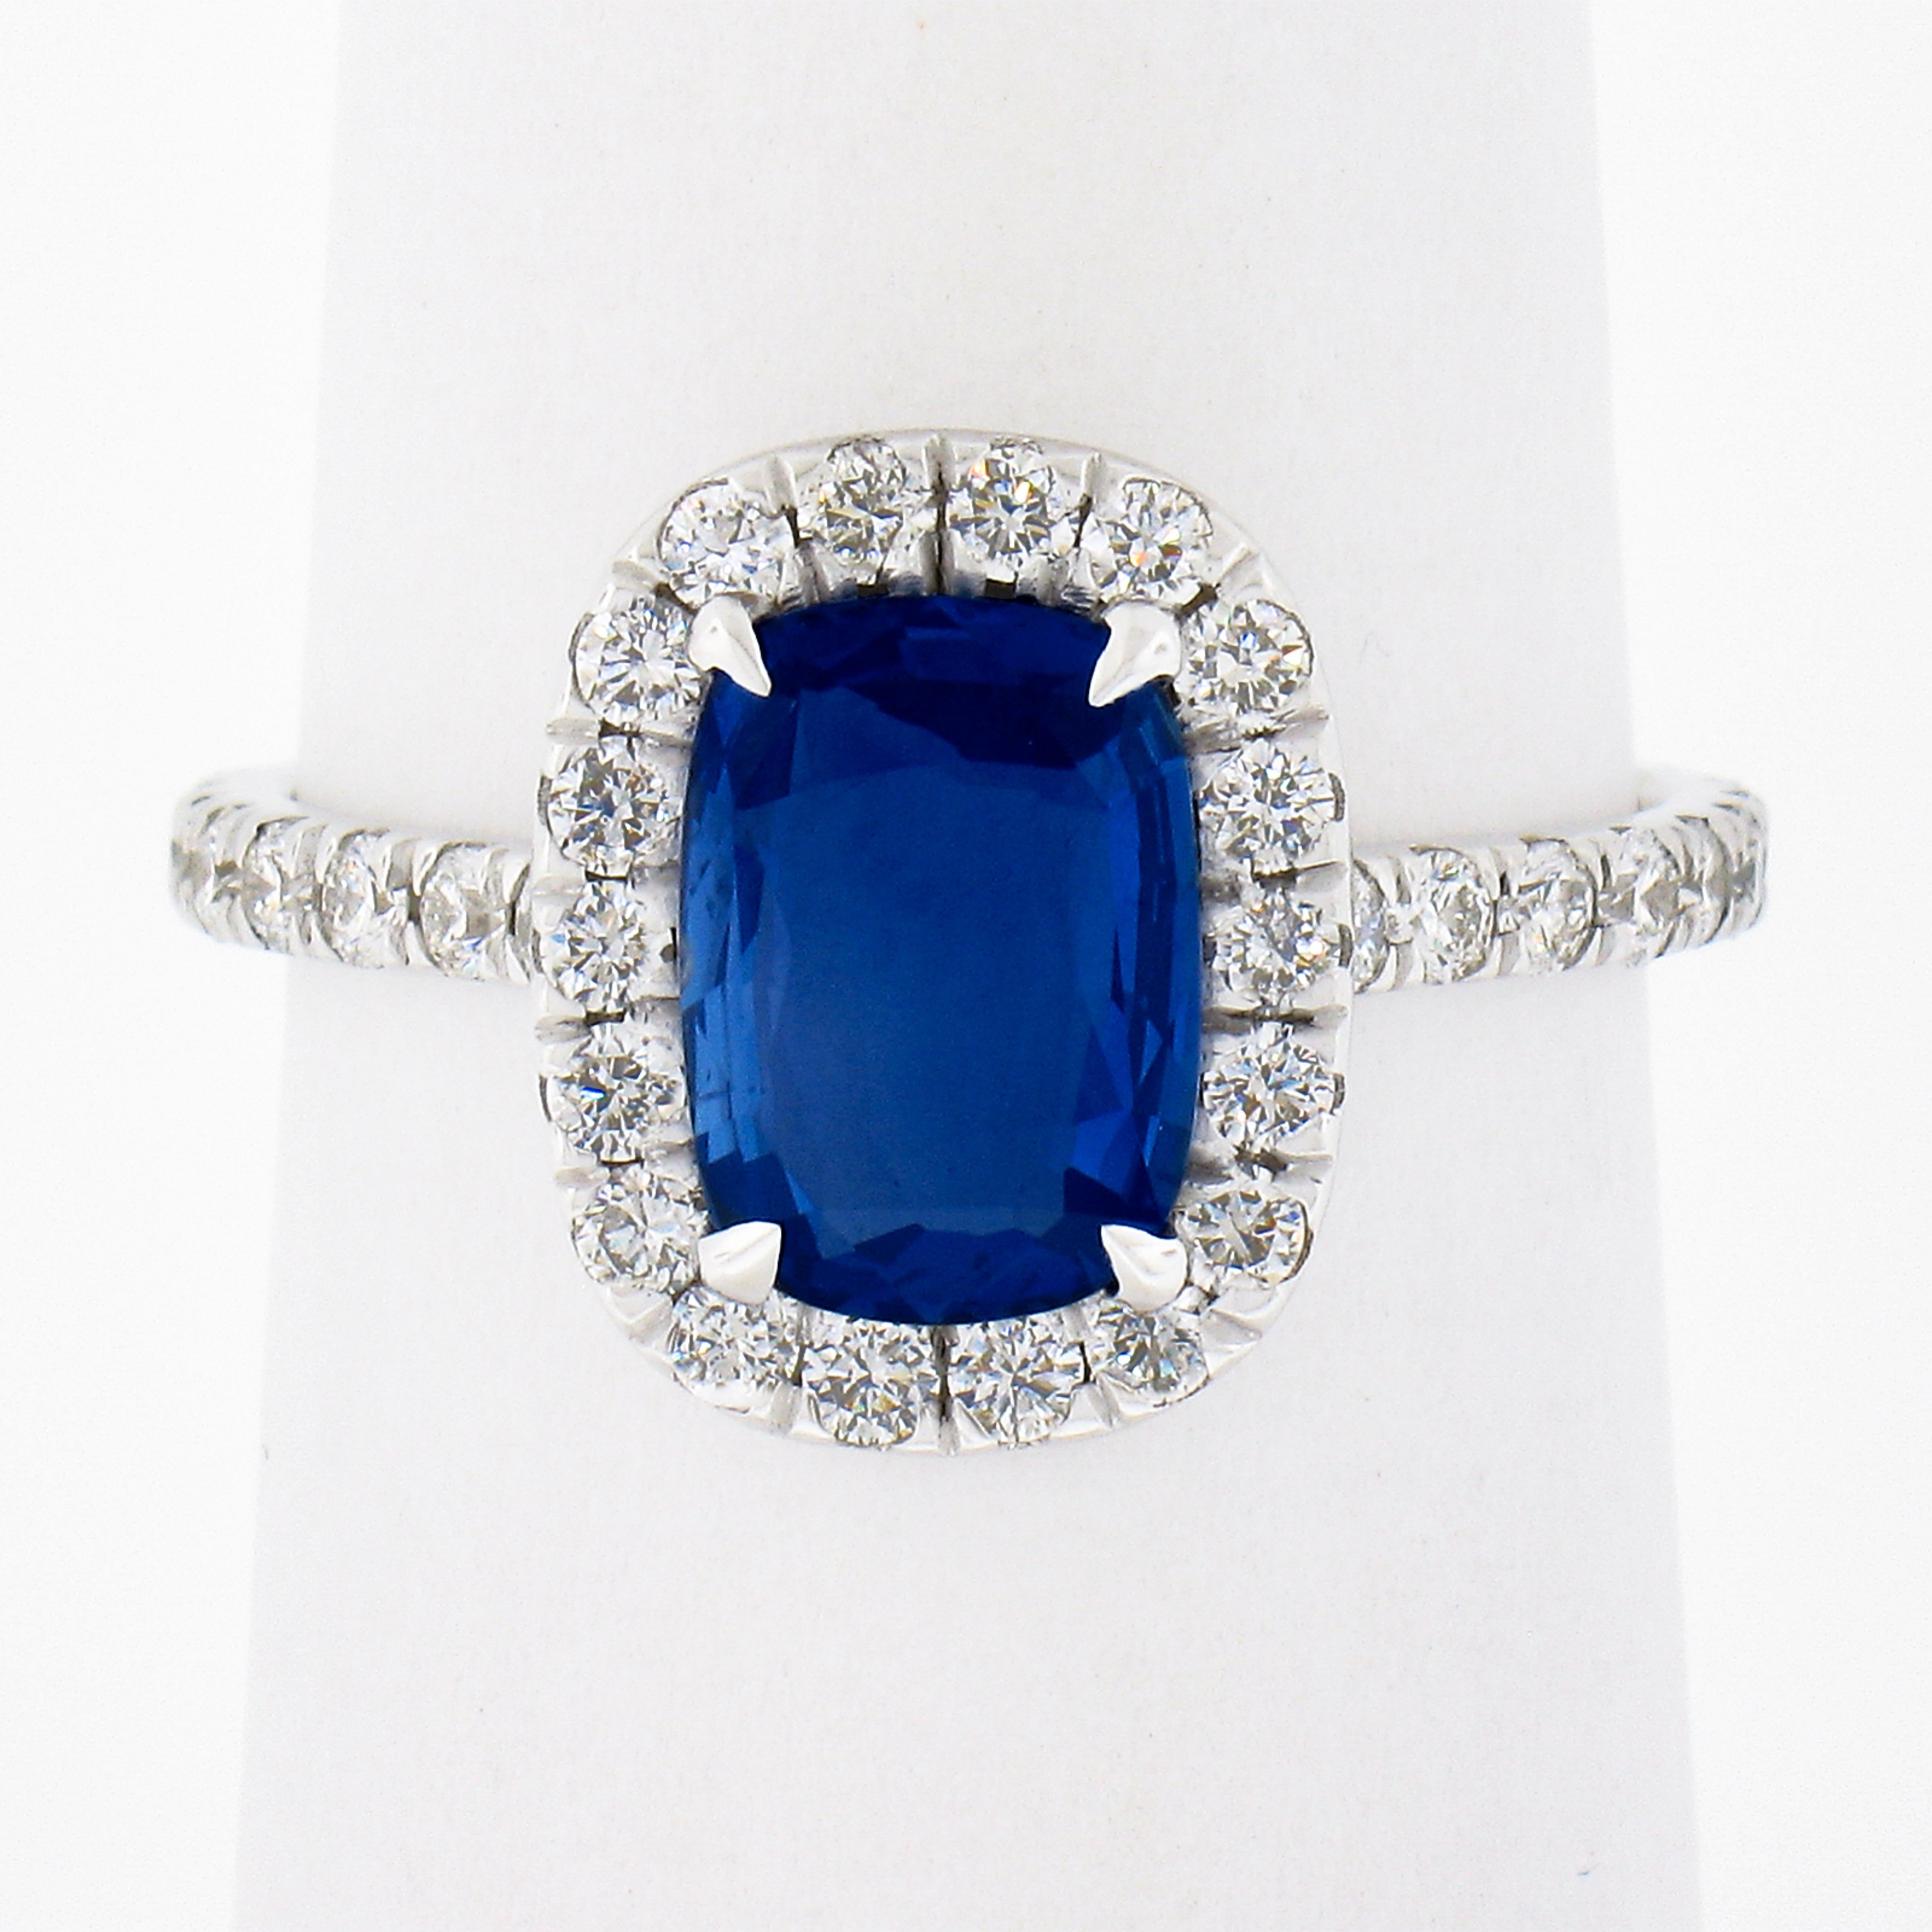 This chic and well made sapphire and diamond engagement ring is newly crafted in solid 18k white gold. It features a cushion, clear and rich blue sapphire that is elegantly claw-prong set at the center of a diamond halo design. The fine quality